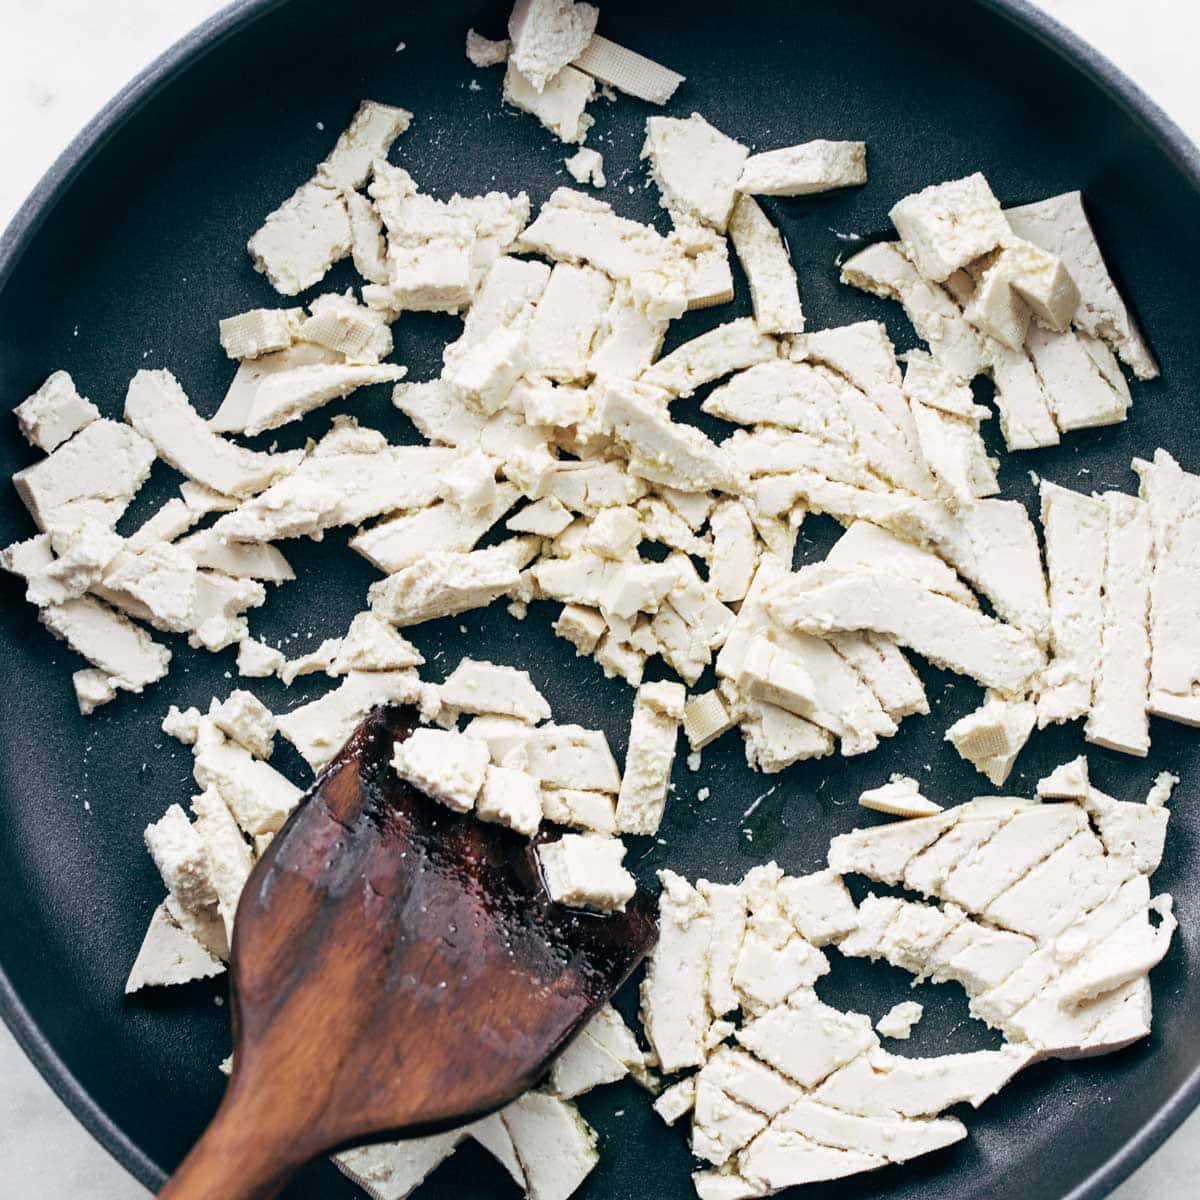 Step 2: Once the tofu is scrambled, add some sauce or seasoning to the pan....